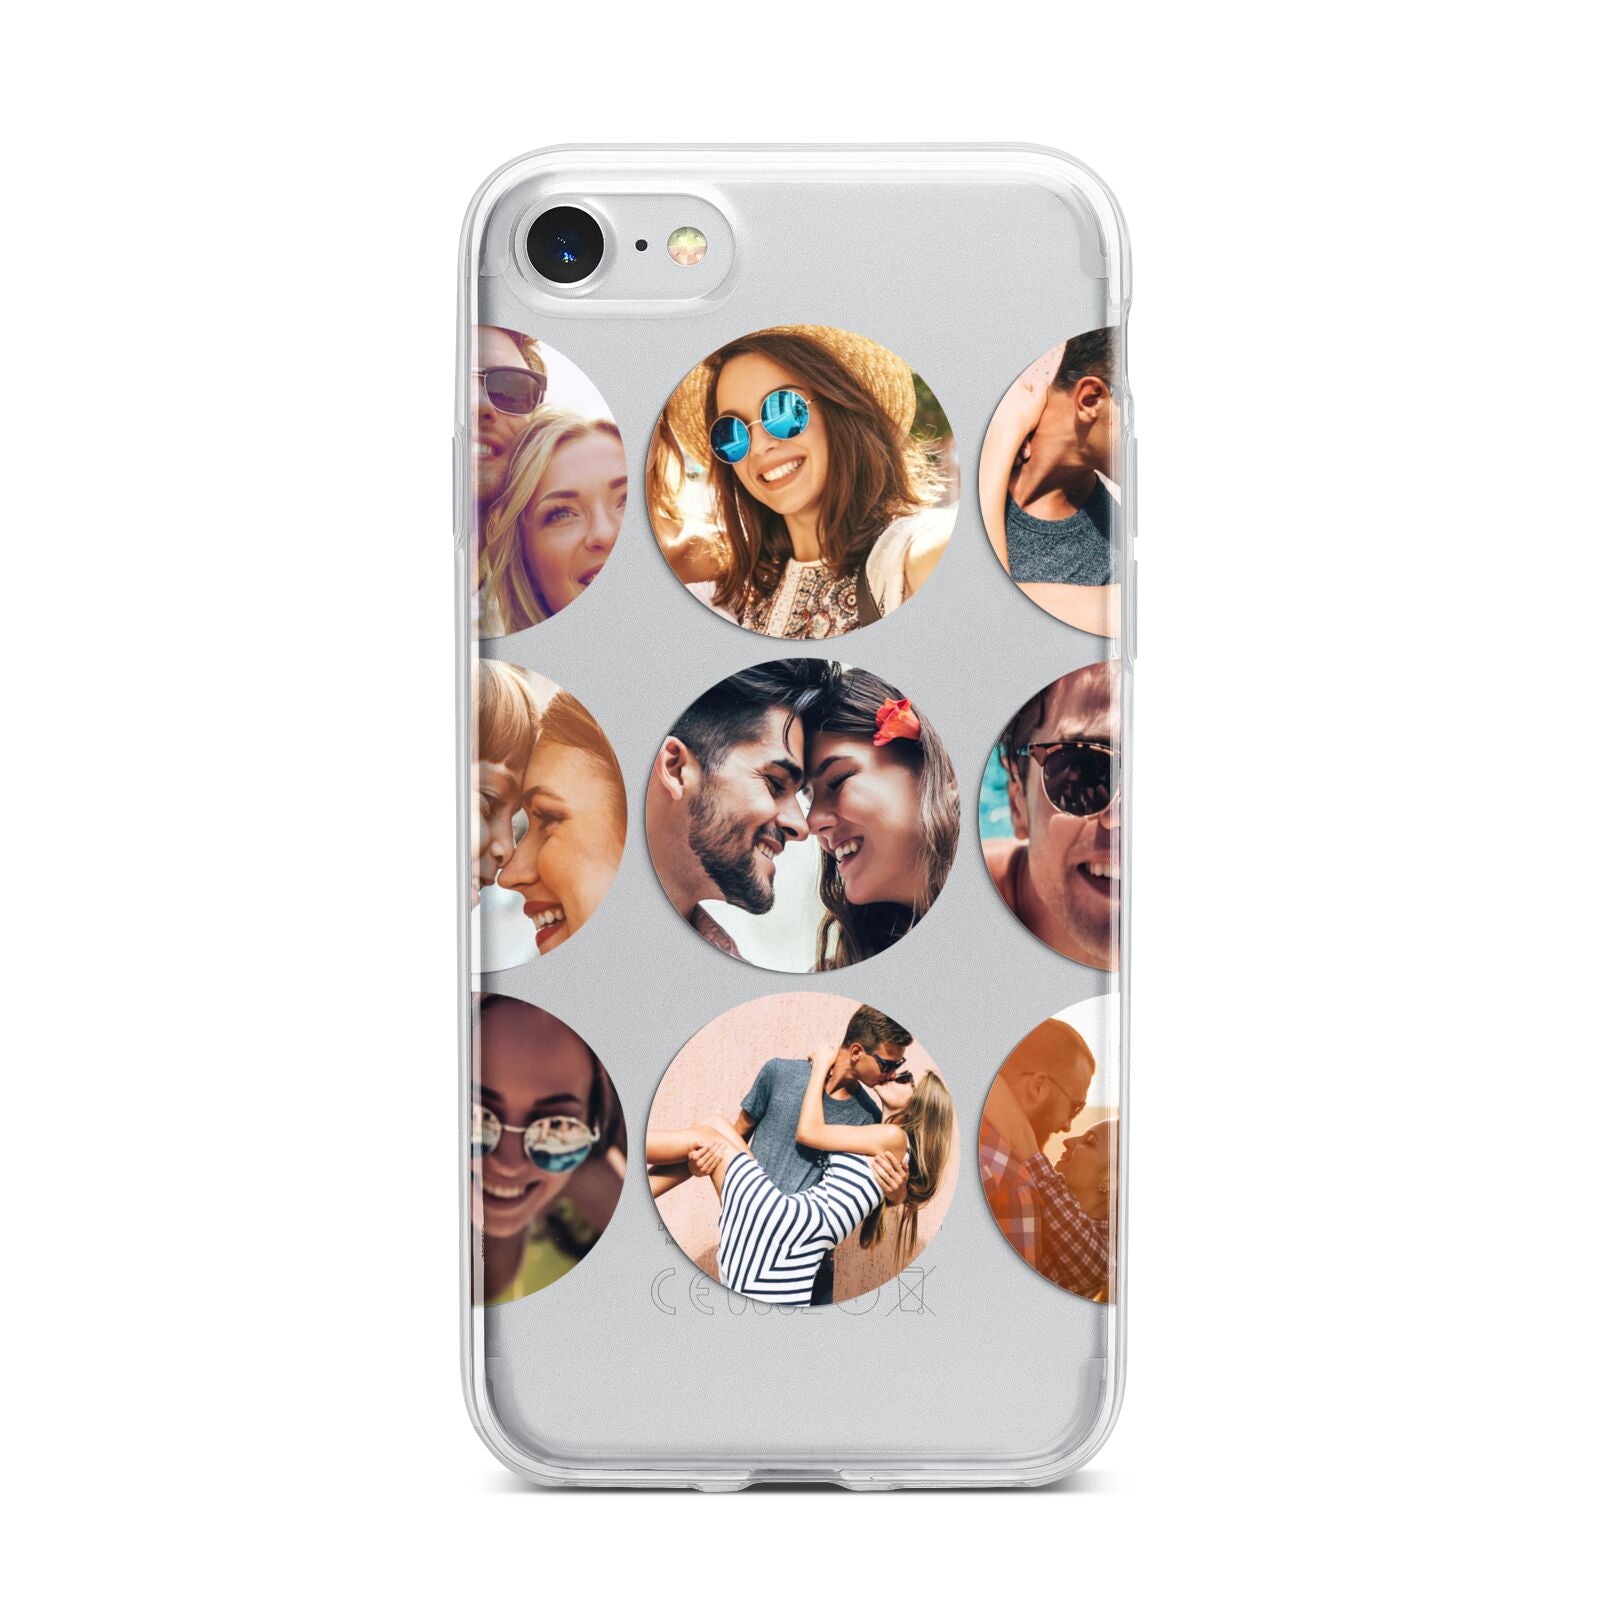 Circular Photo Montage Upload iPhone 7 Bumper Case on Silver iPhone